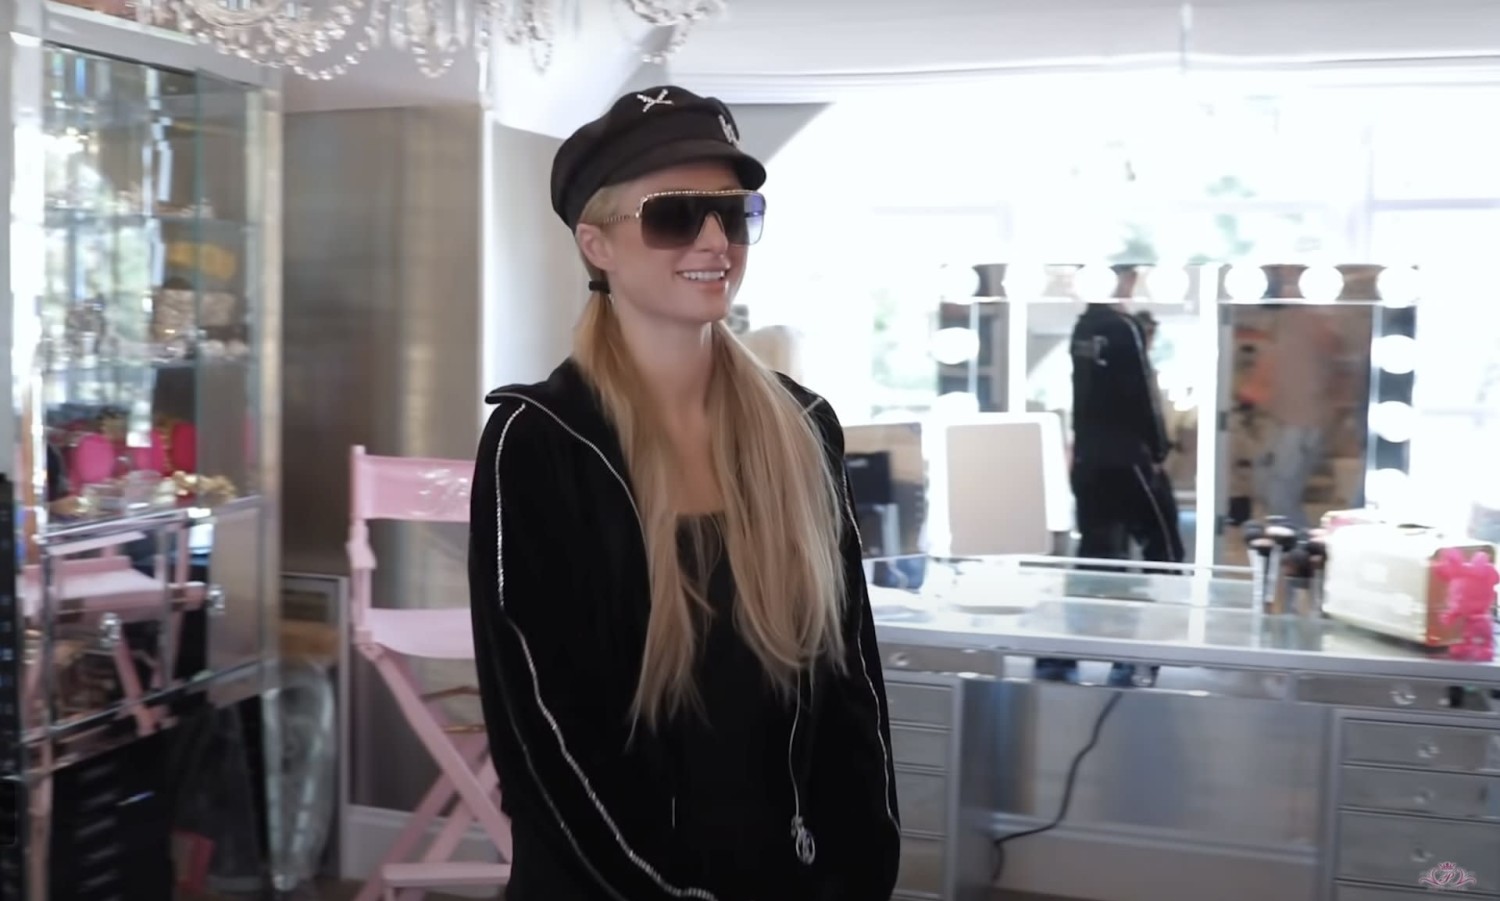 ‘DISGUSTING’ VIDEO OF PARIS HILTON’S HOME SPARKS OUTRAGE ONLINE: ‘I [CAN’T] EVEN FATHOM…’